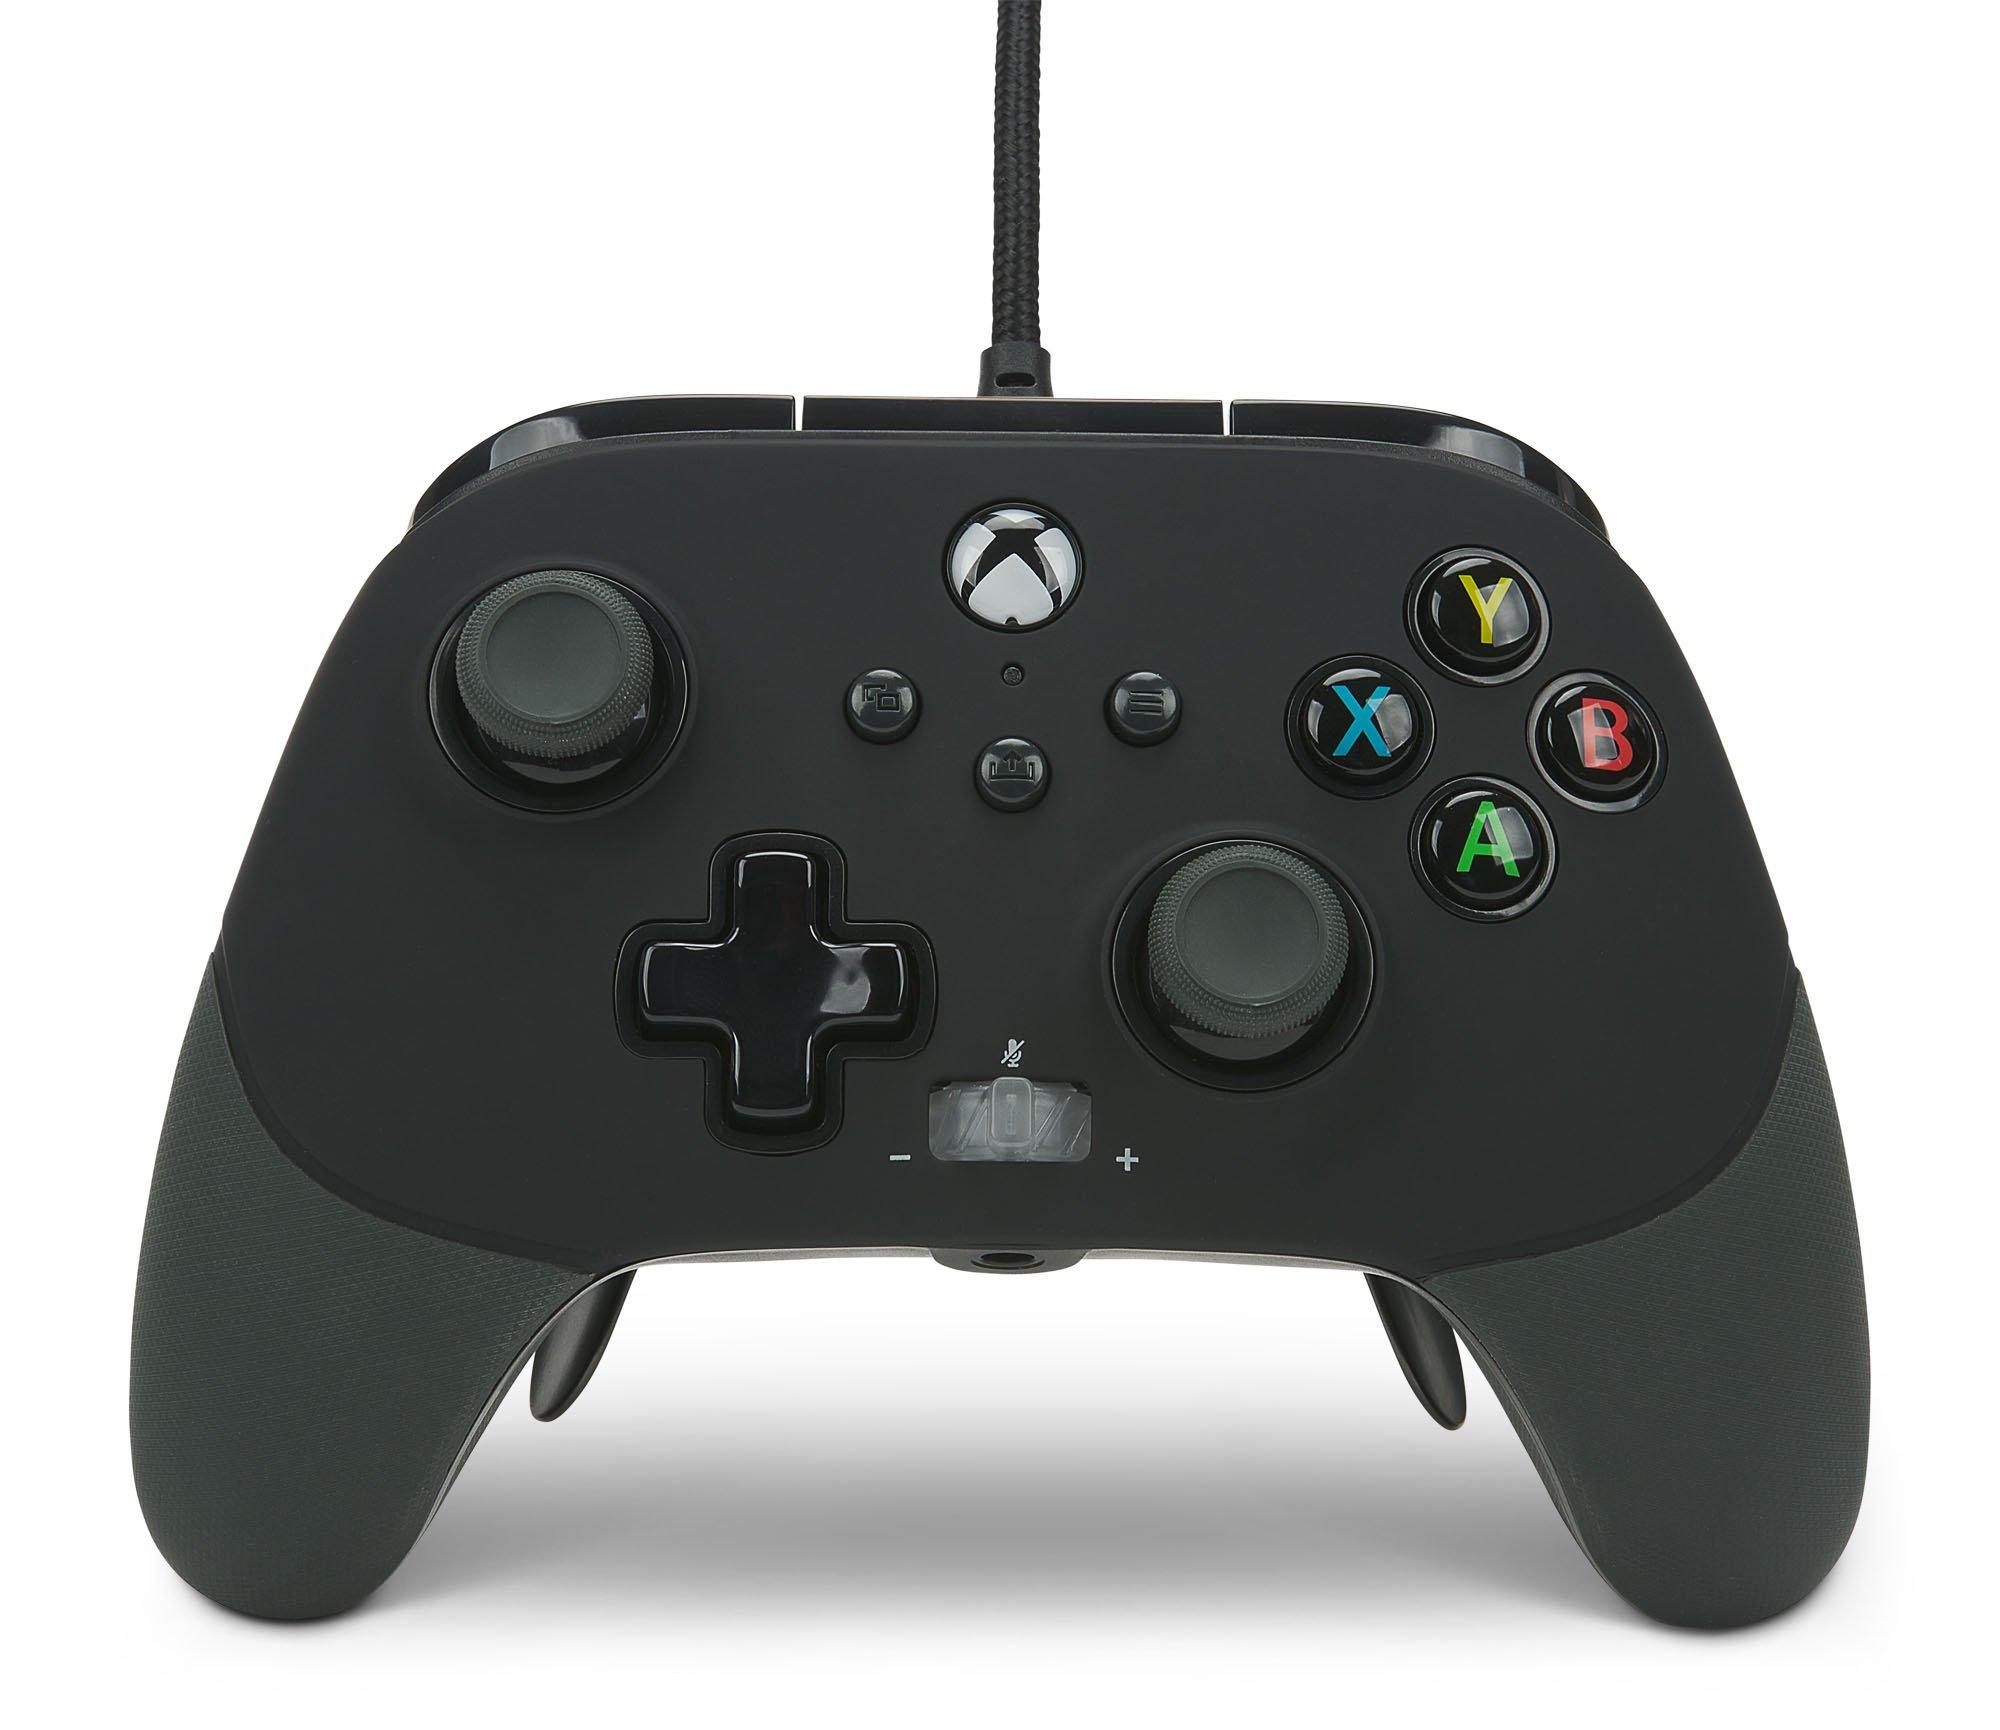 https://media.gamestop.com/i/gamestop/11112494/PowerA-Fusion-Pro-2-Wired-Controller-for-Xbox-Series-X/S?$pdp$